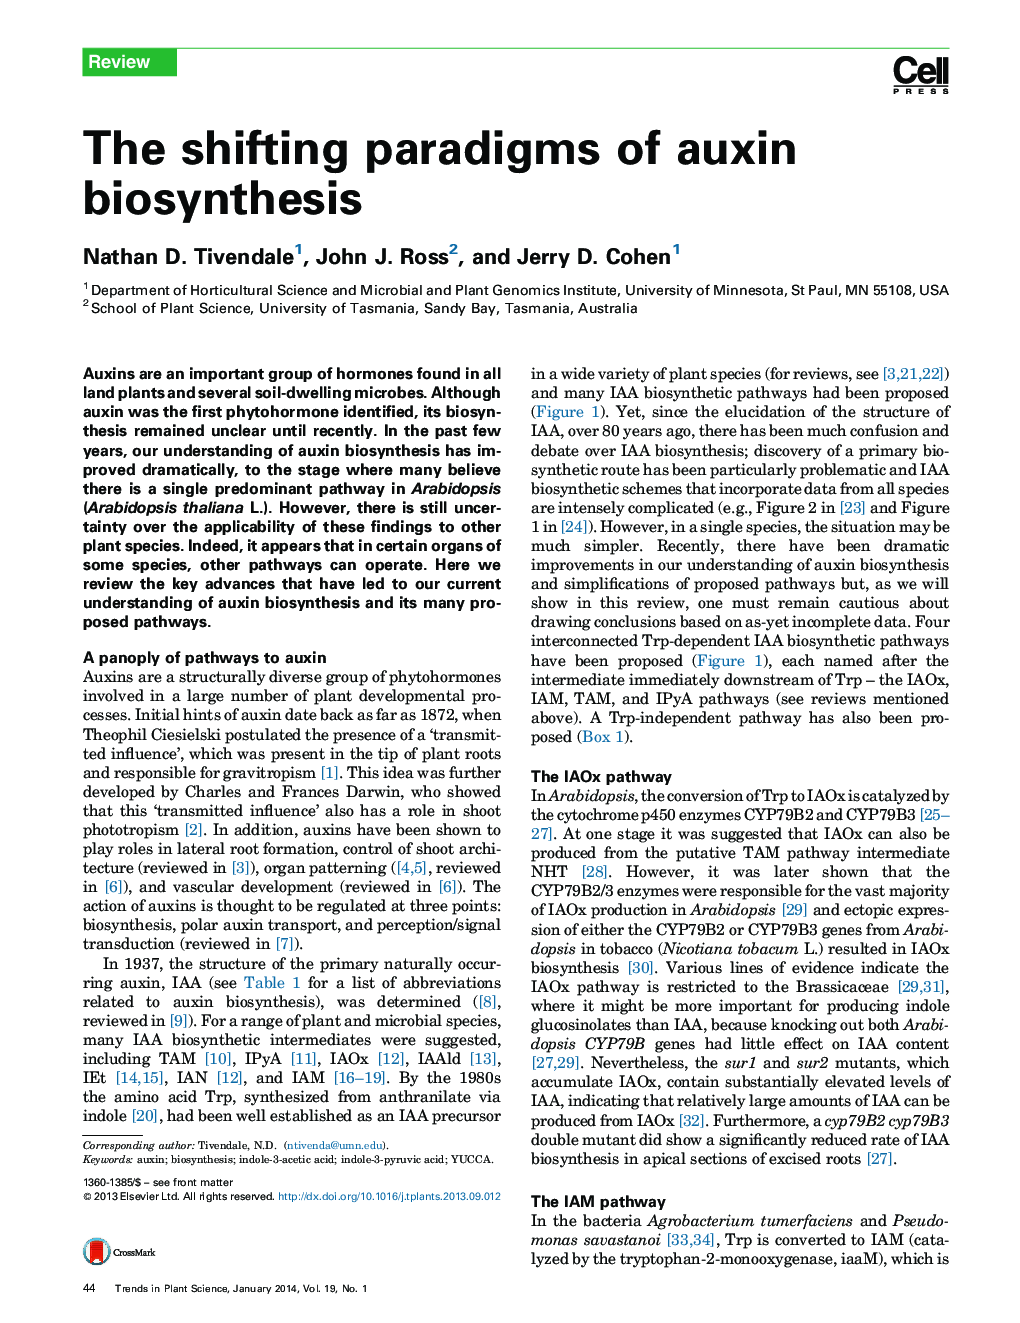 The shifting paradigms of auxin biosynthesis